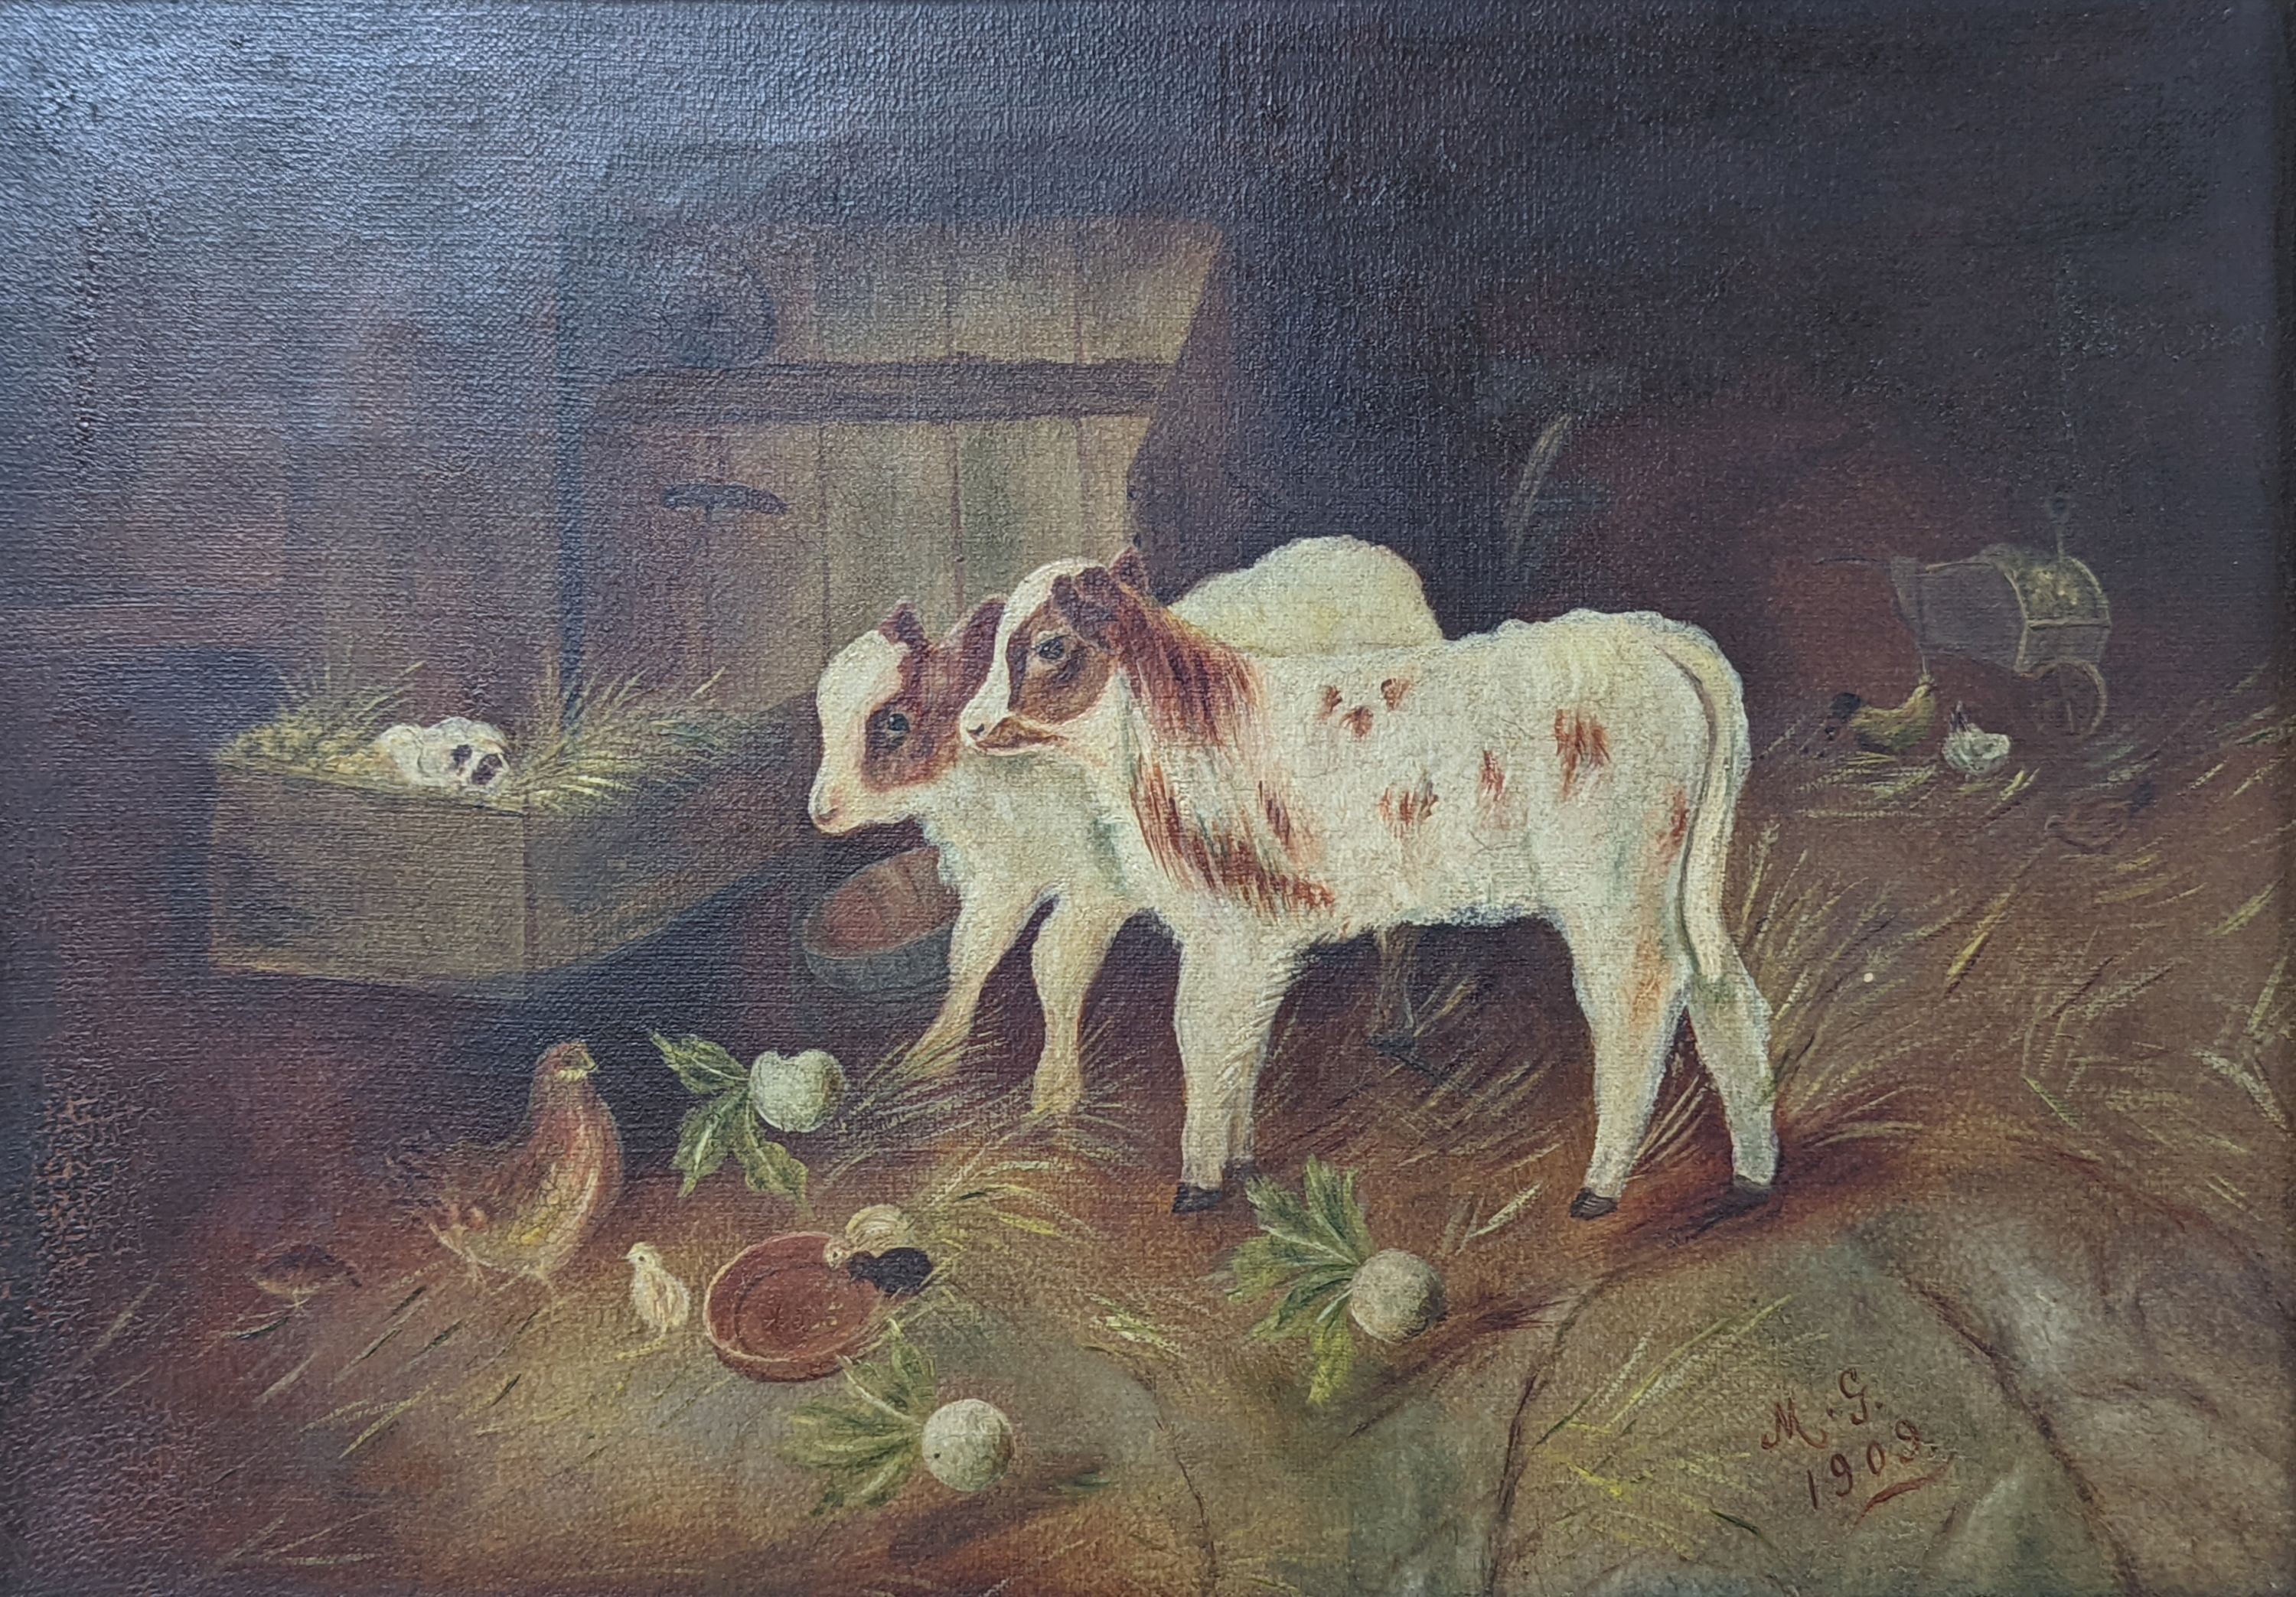 MG, 1909, oil on canvas, Cows and chickens in a stable, signed and dated, 24 x 34cm